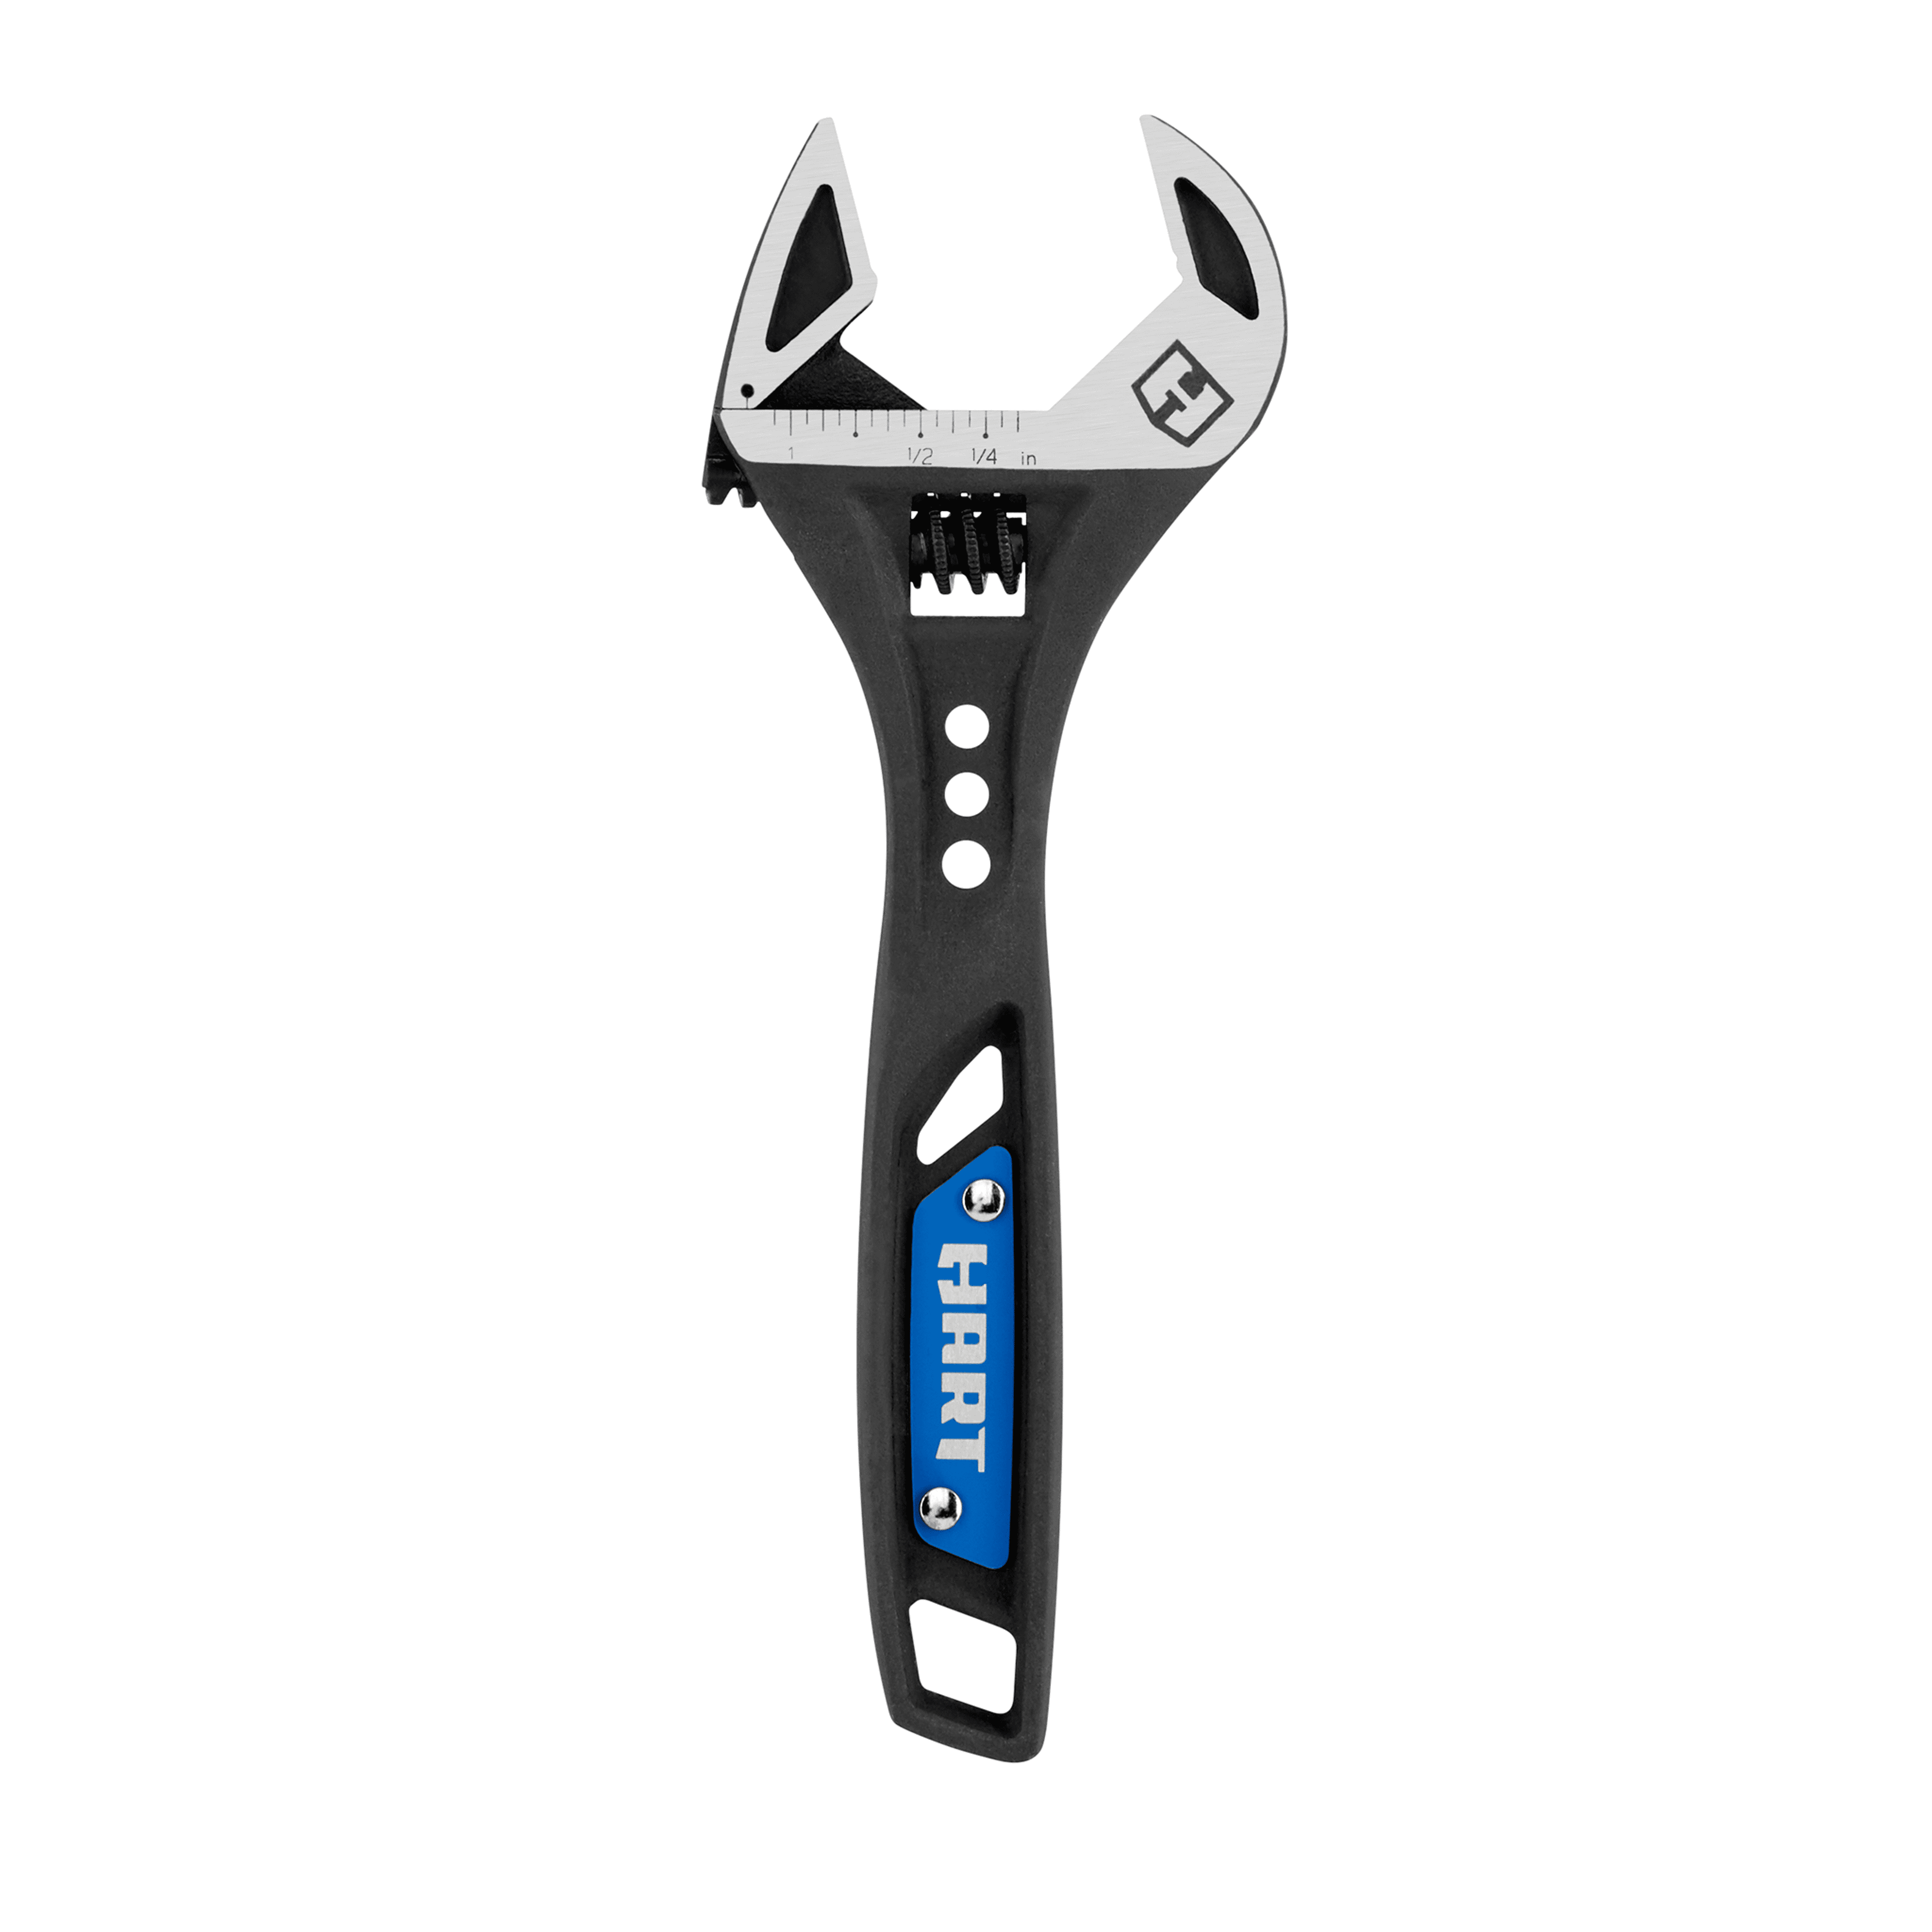 1 Piece Wide Opening Adjustable Wrench 5 inch with Short Handle,Chrome Vanadium Steel Forged Stubby Adjustable Wrench Spanner